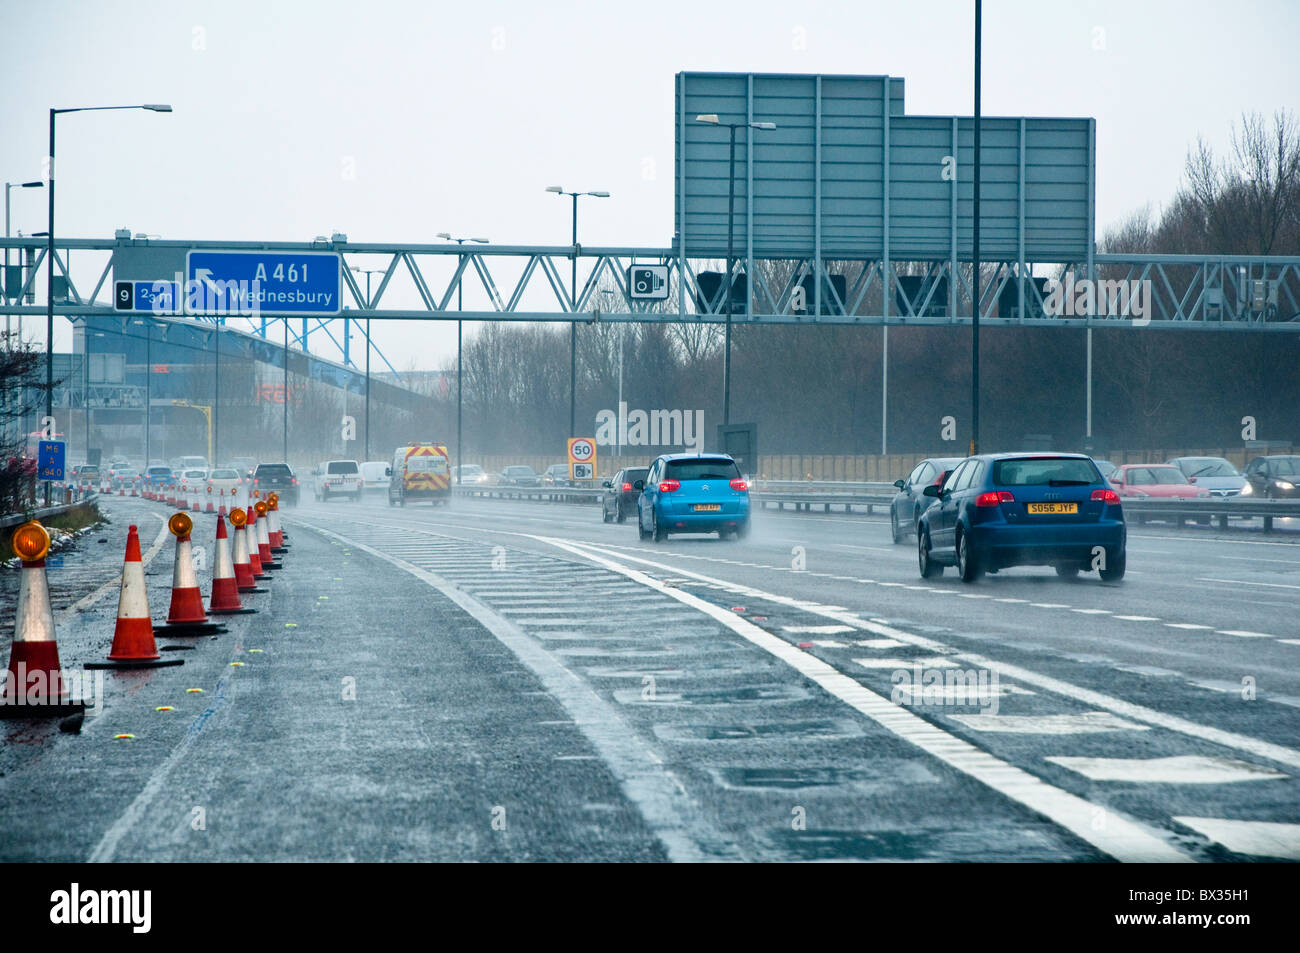 Junction 8, where the M5, joins the M6 motorway. Drivers viewpoint on a grey wintry day, showing spray and poor visibility. UK Stock Photo